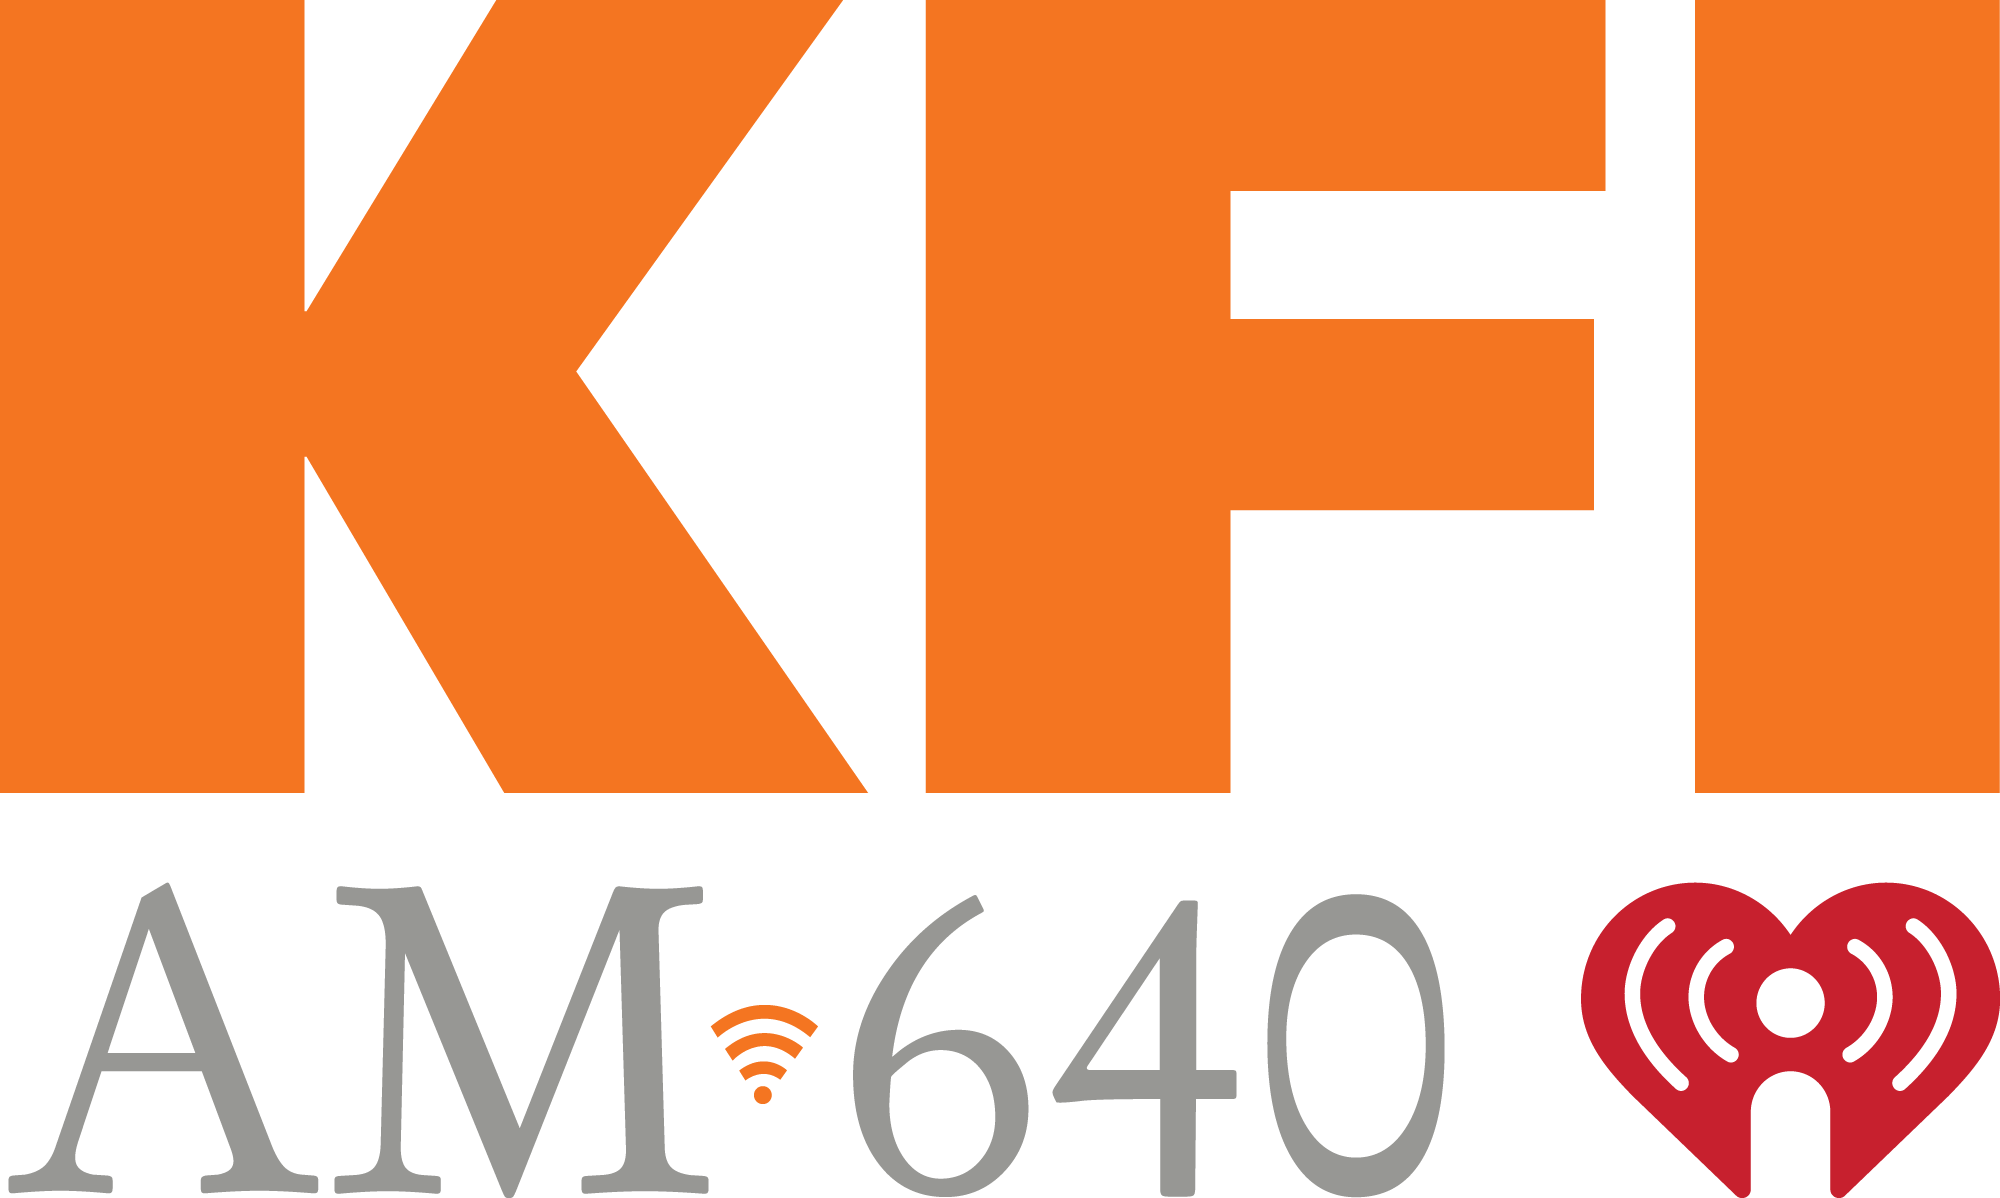 Kfi Am 640 More Stimulating Talk And News From Los Angeles